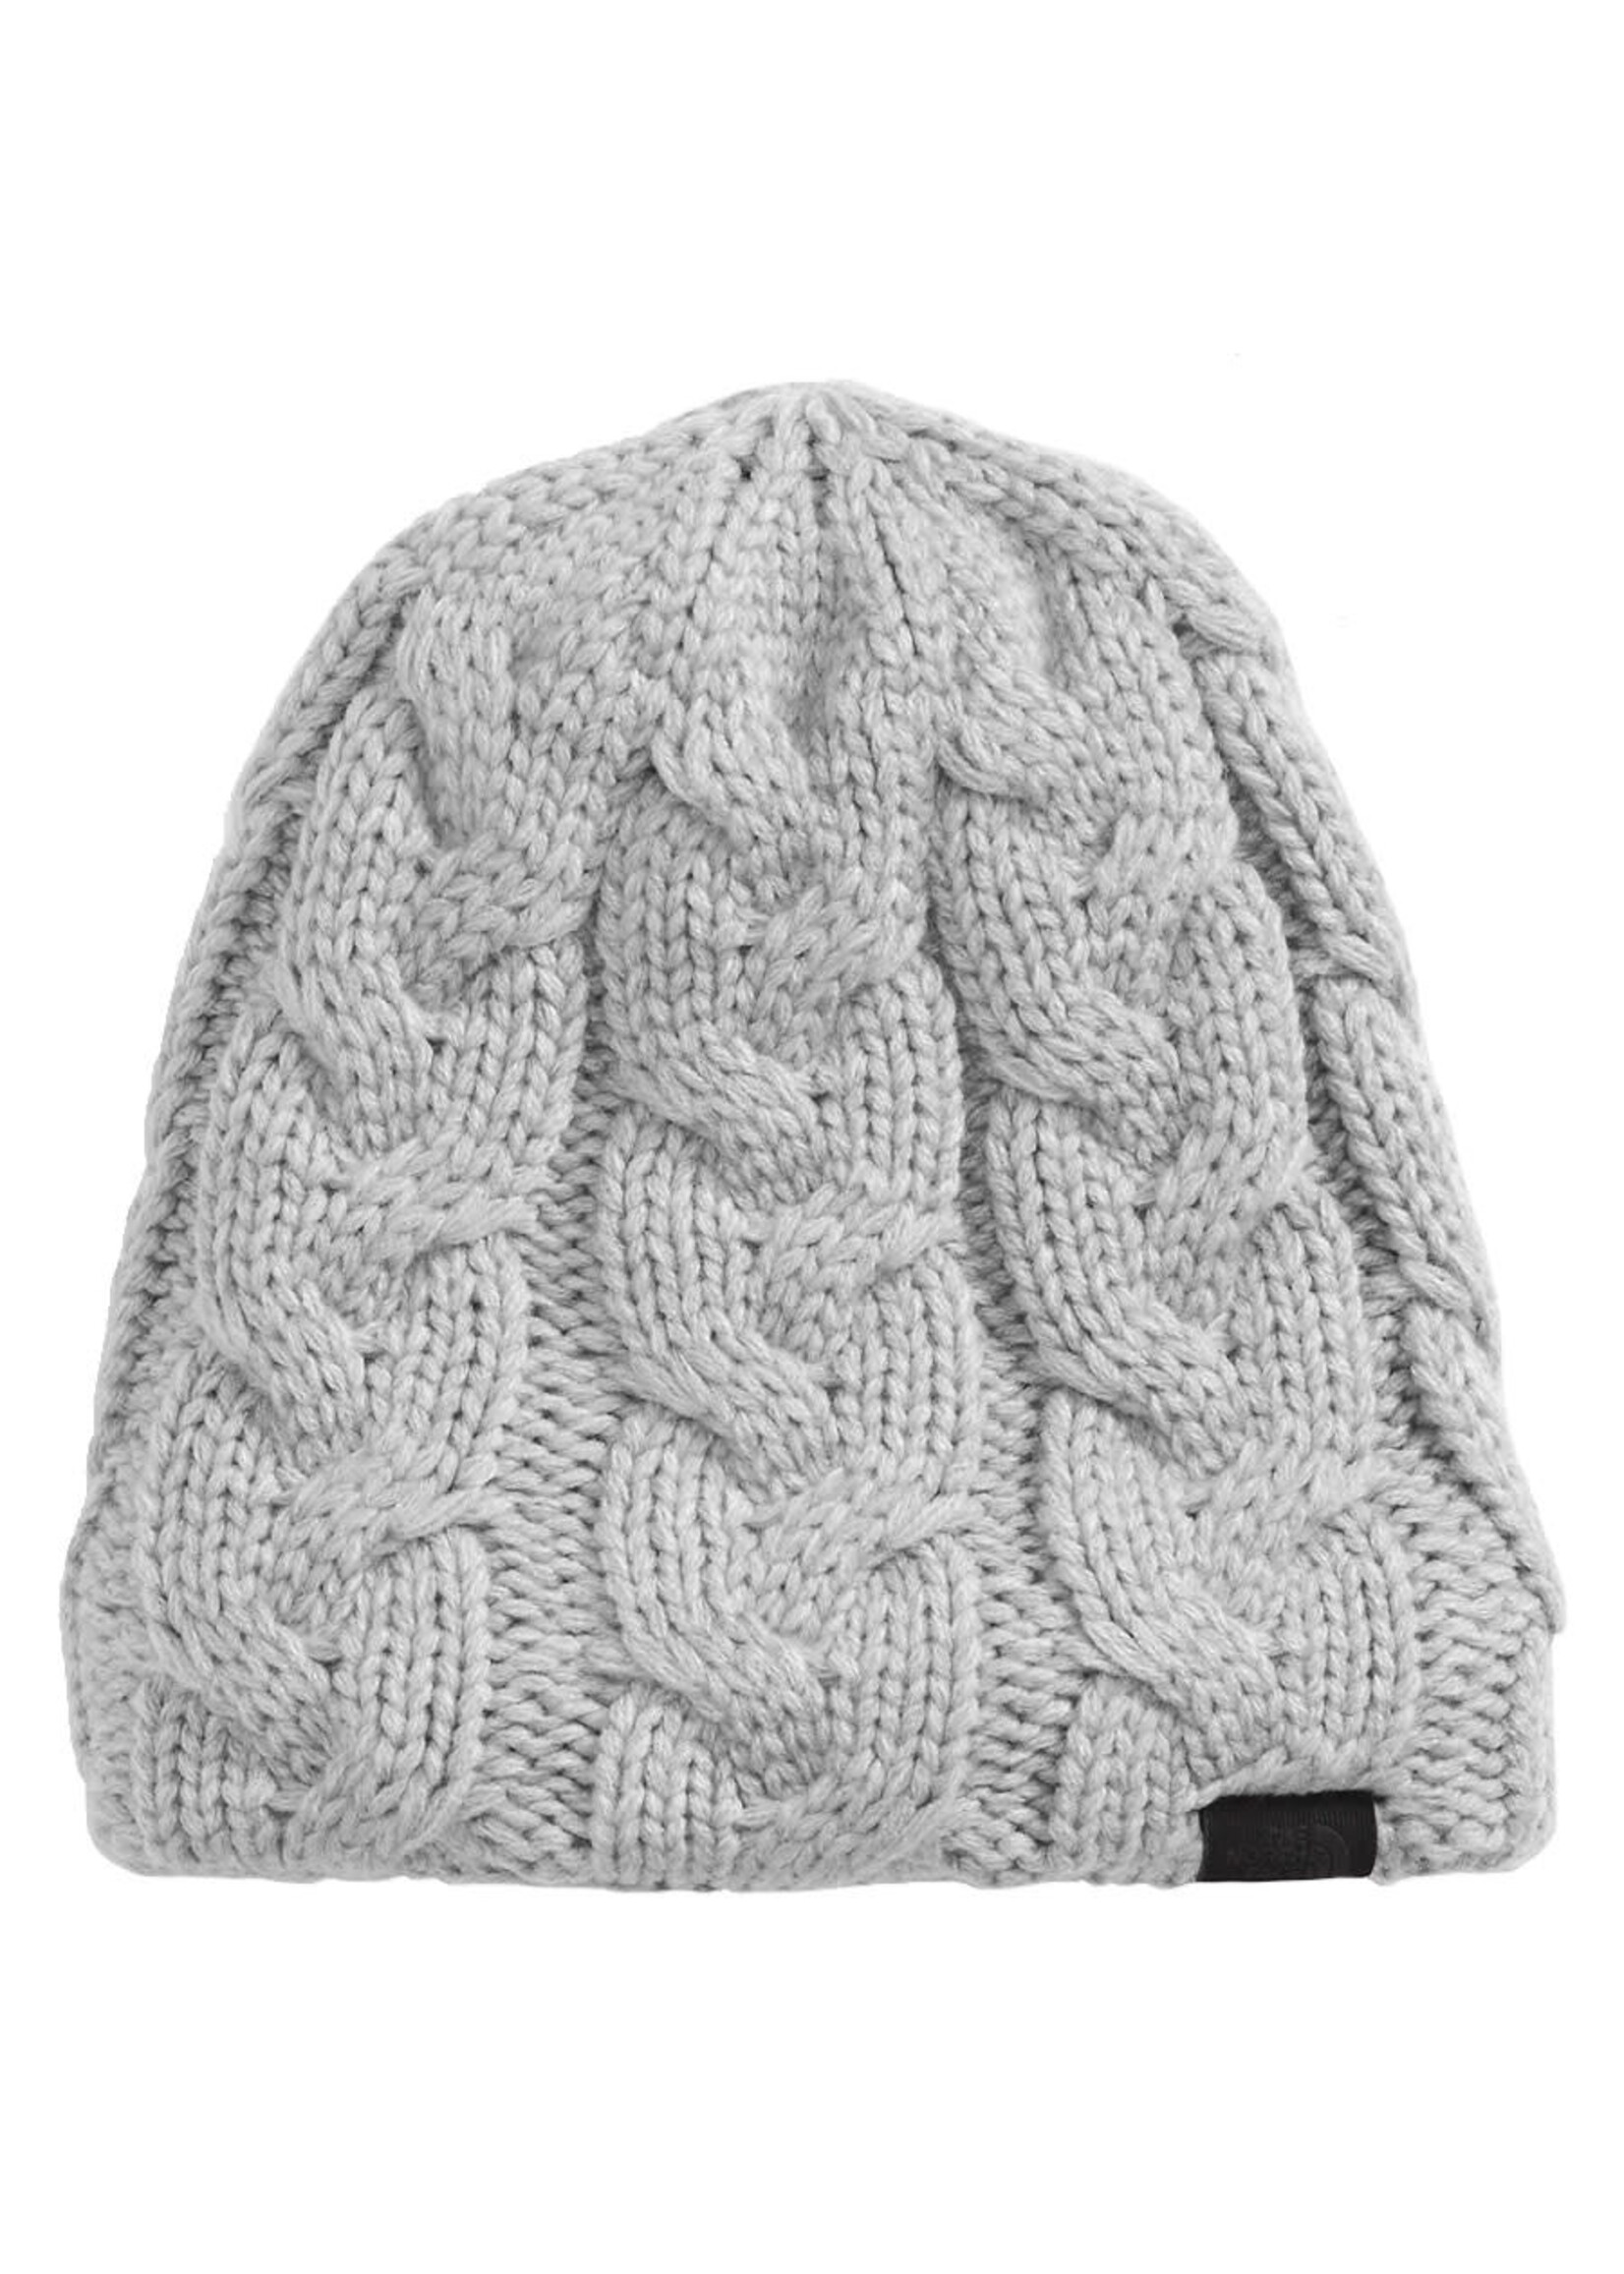 THE NORTH FACE Tuque CABLE MINNA